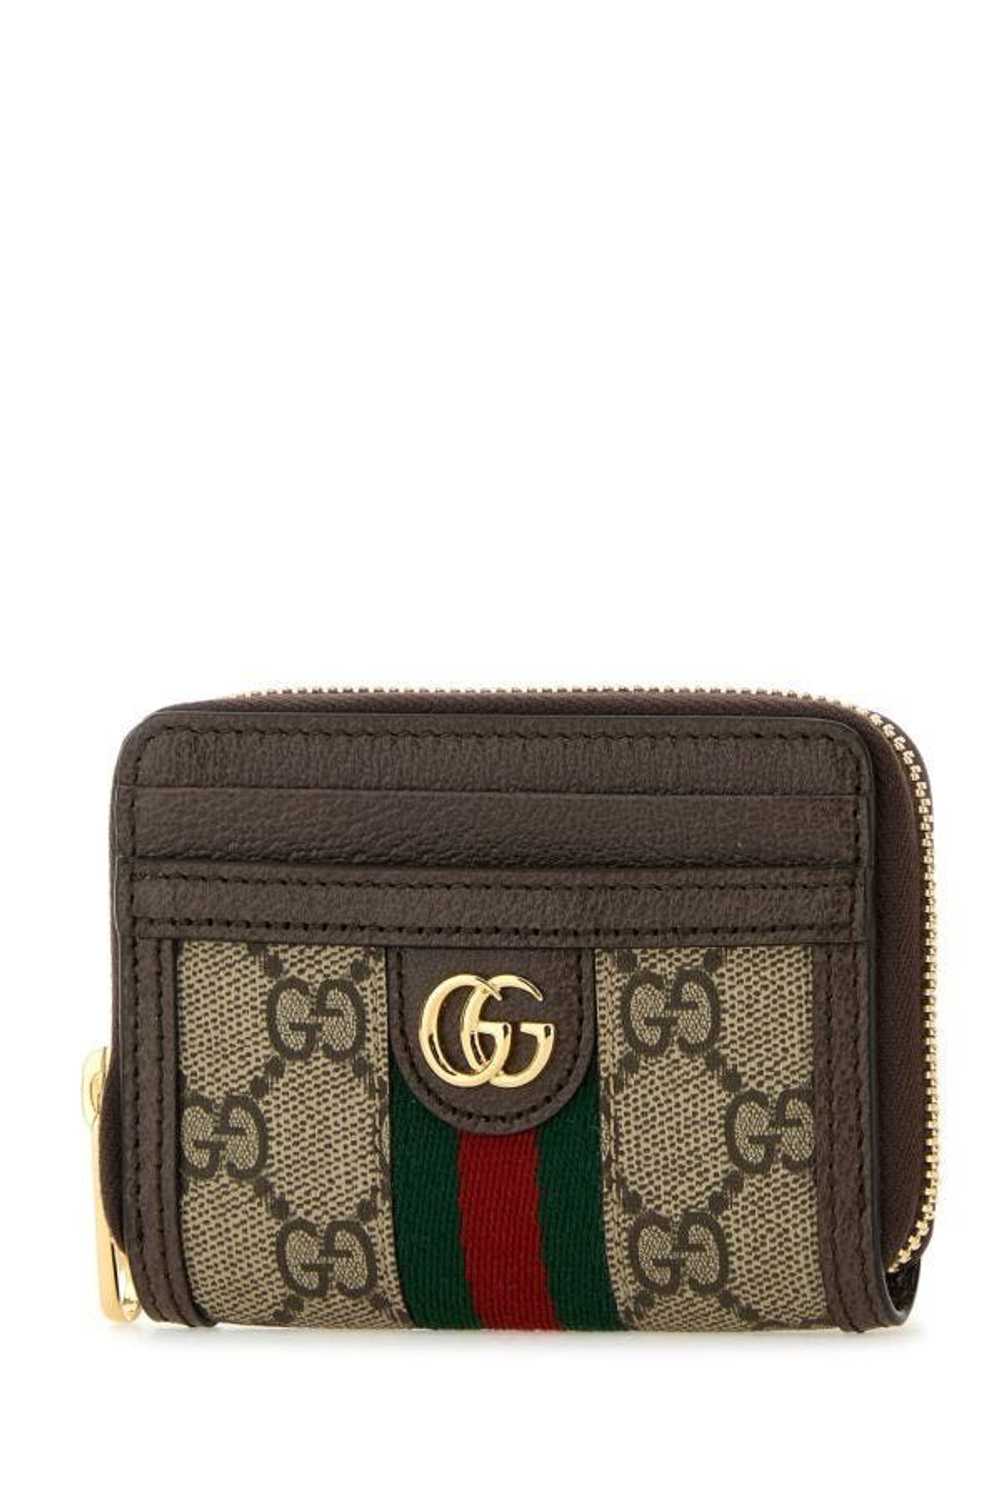 Gucci Gg Supreme Fabric Ophidia Wallet - image 4